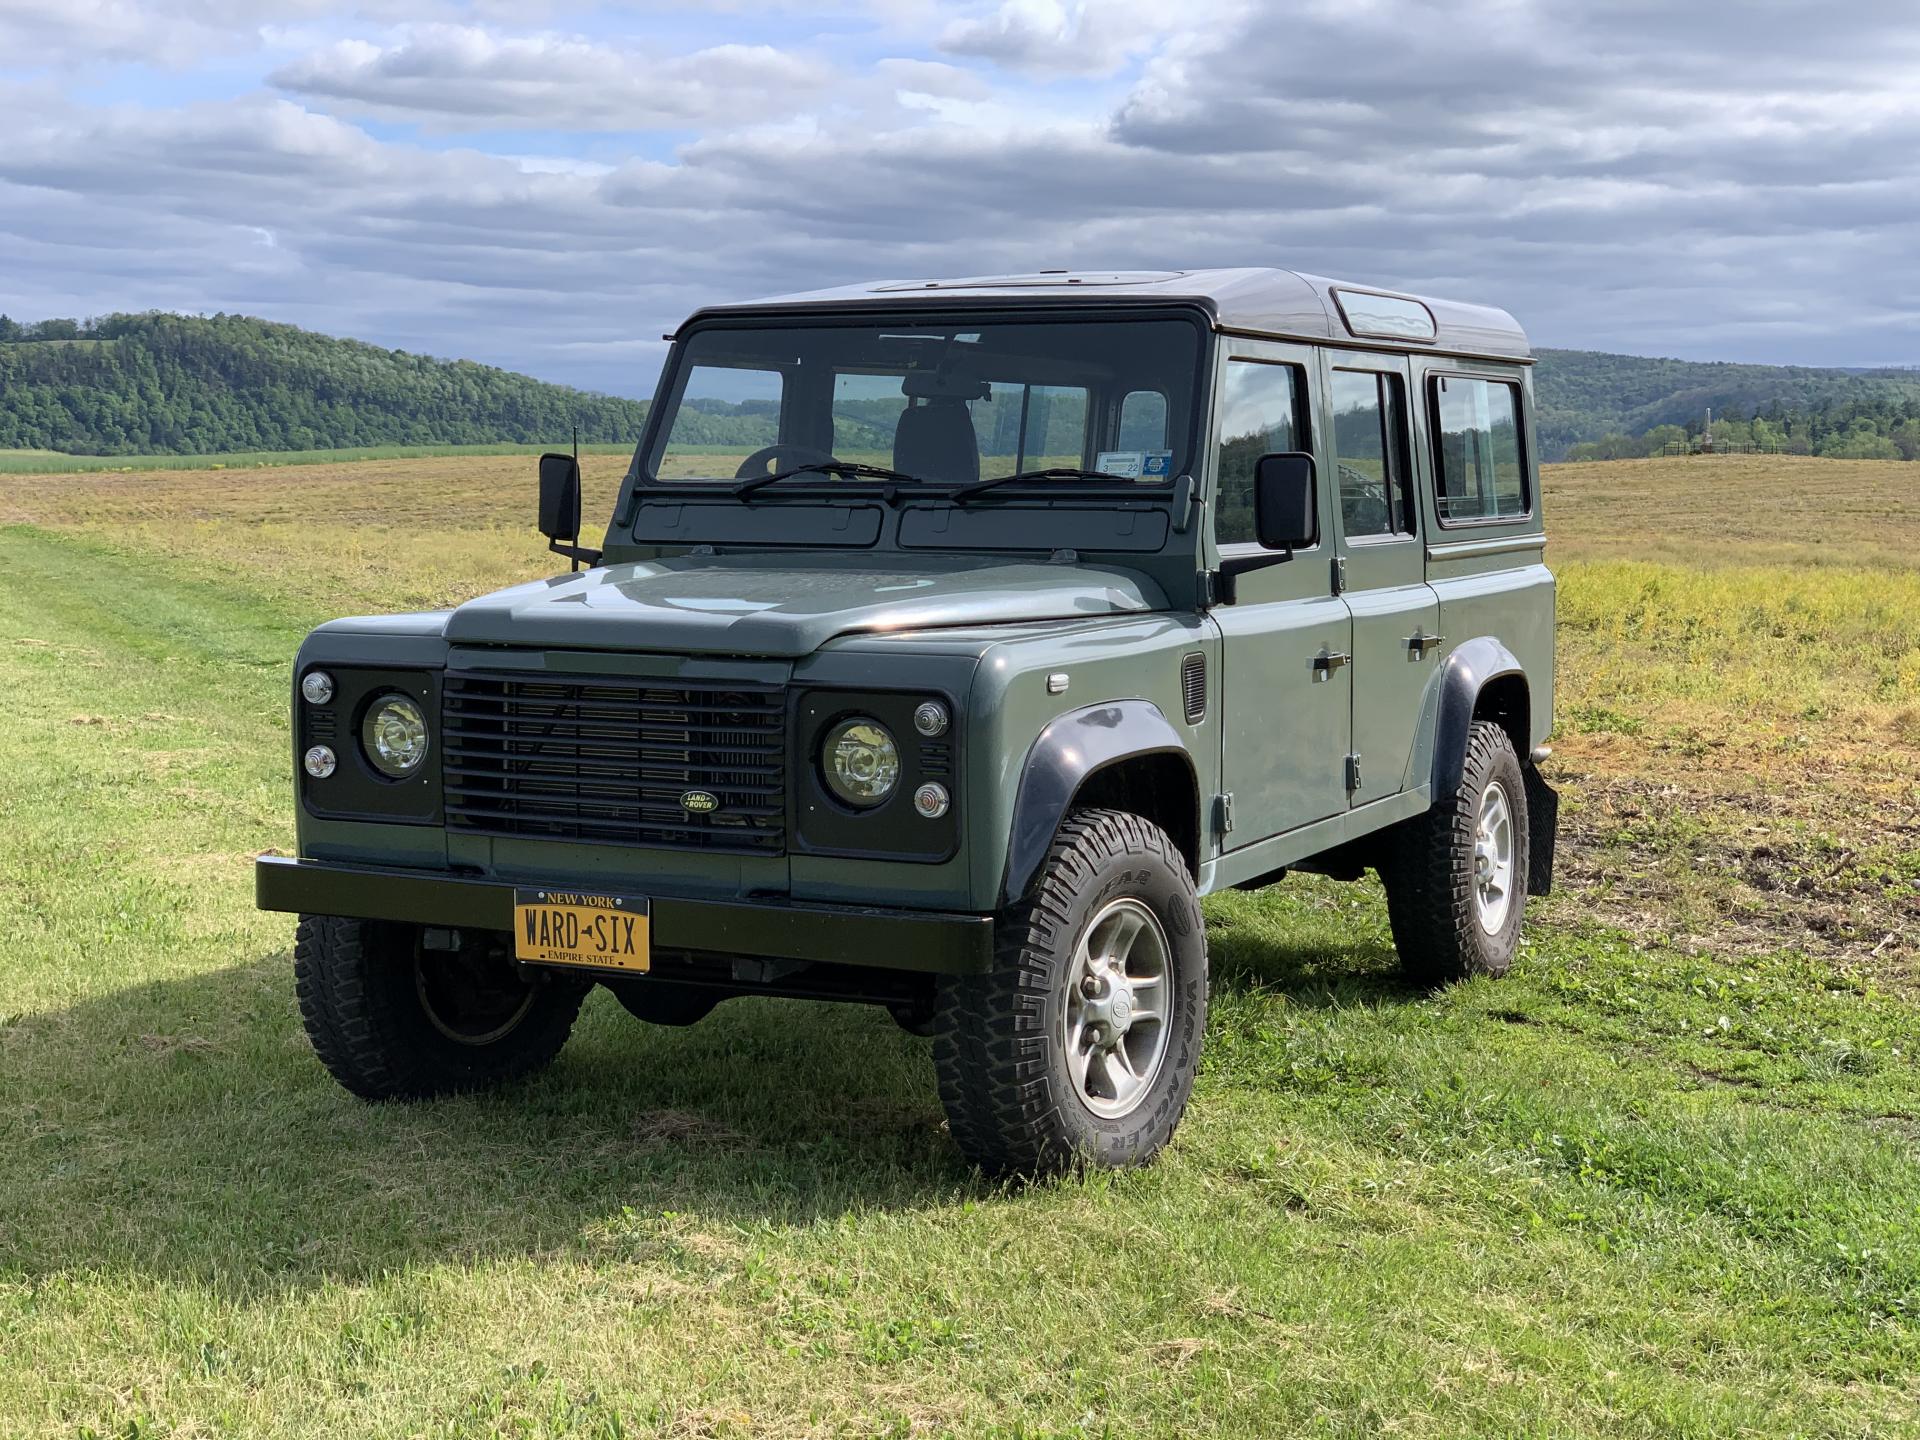 1992 Land Rover Defender 110 90s 00s Offroad SUV British Stock